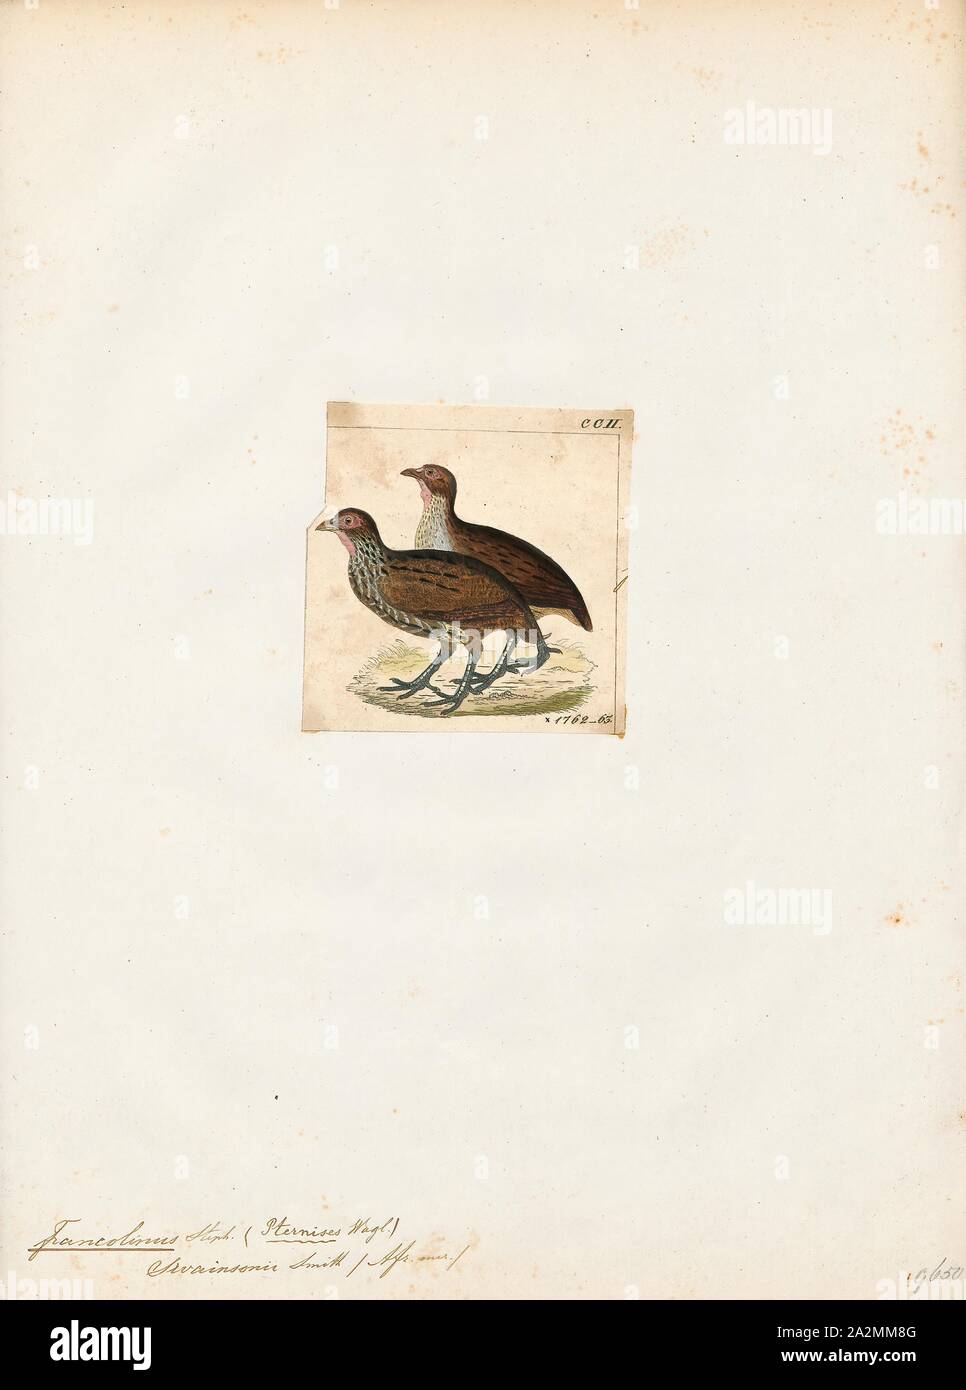 Francolinus swainsoni, Print, Francolinus is a genus of birds in the francolin group of the partridge subfamily of the pheasant family. Its five species range from western Asia and central Asia through to southern Asia and south-eastern Asia., 1820-1863 Stock Photo